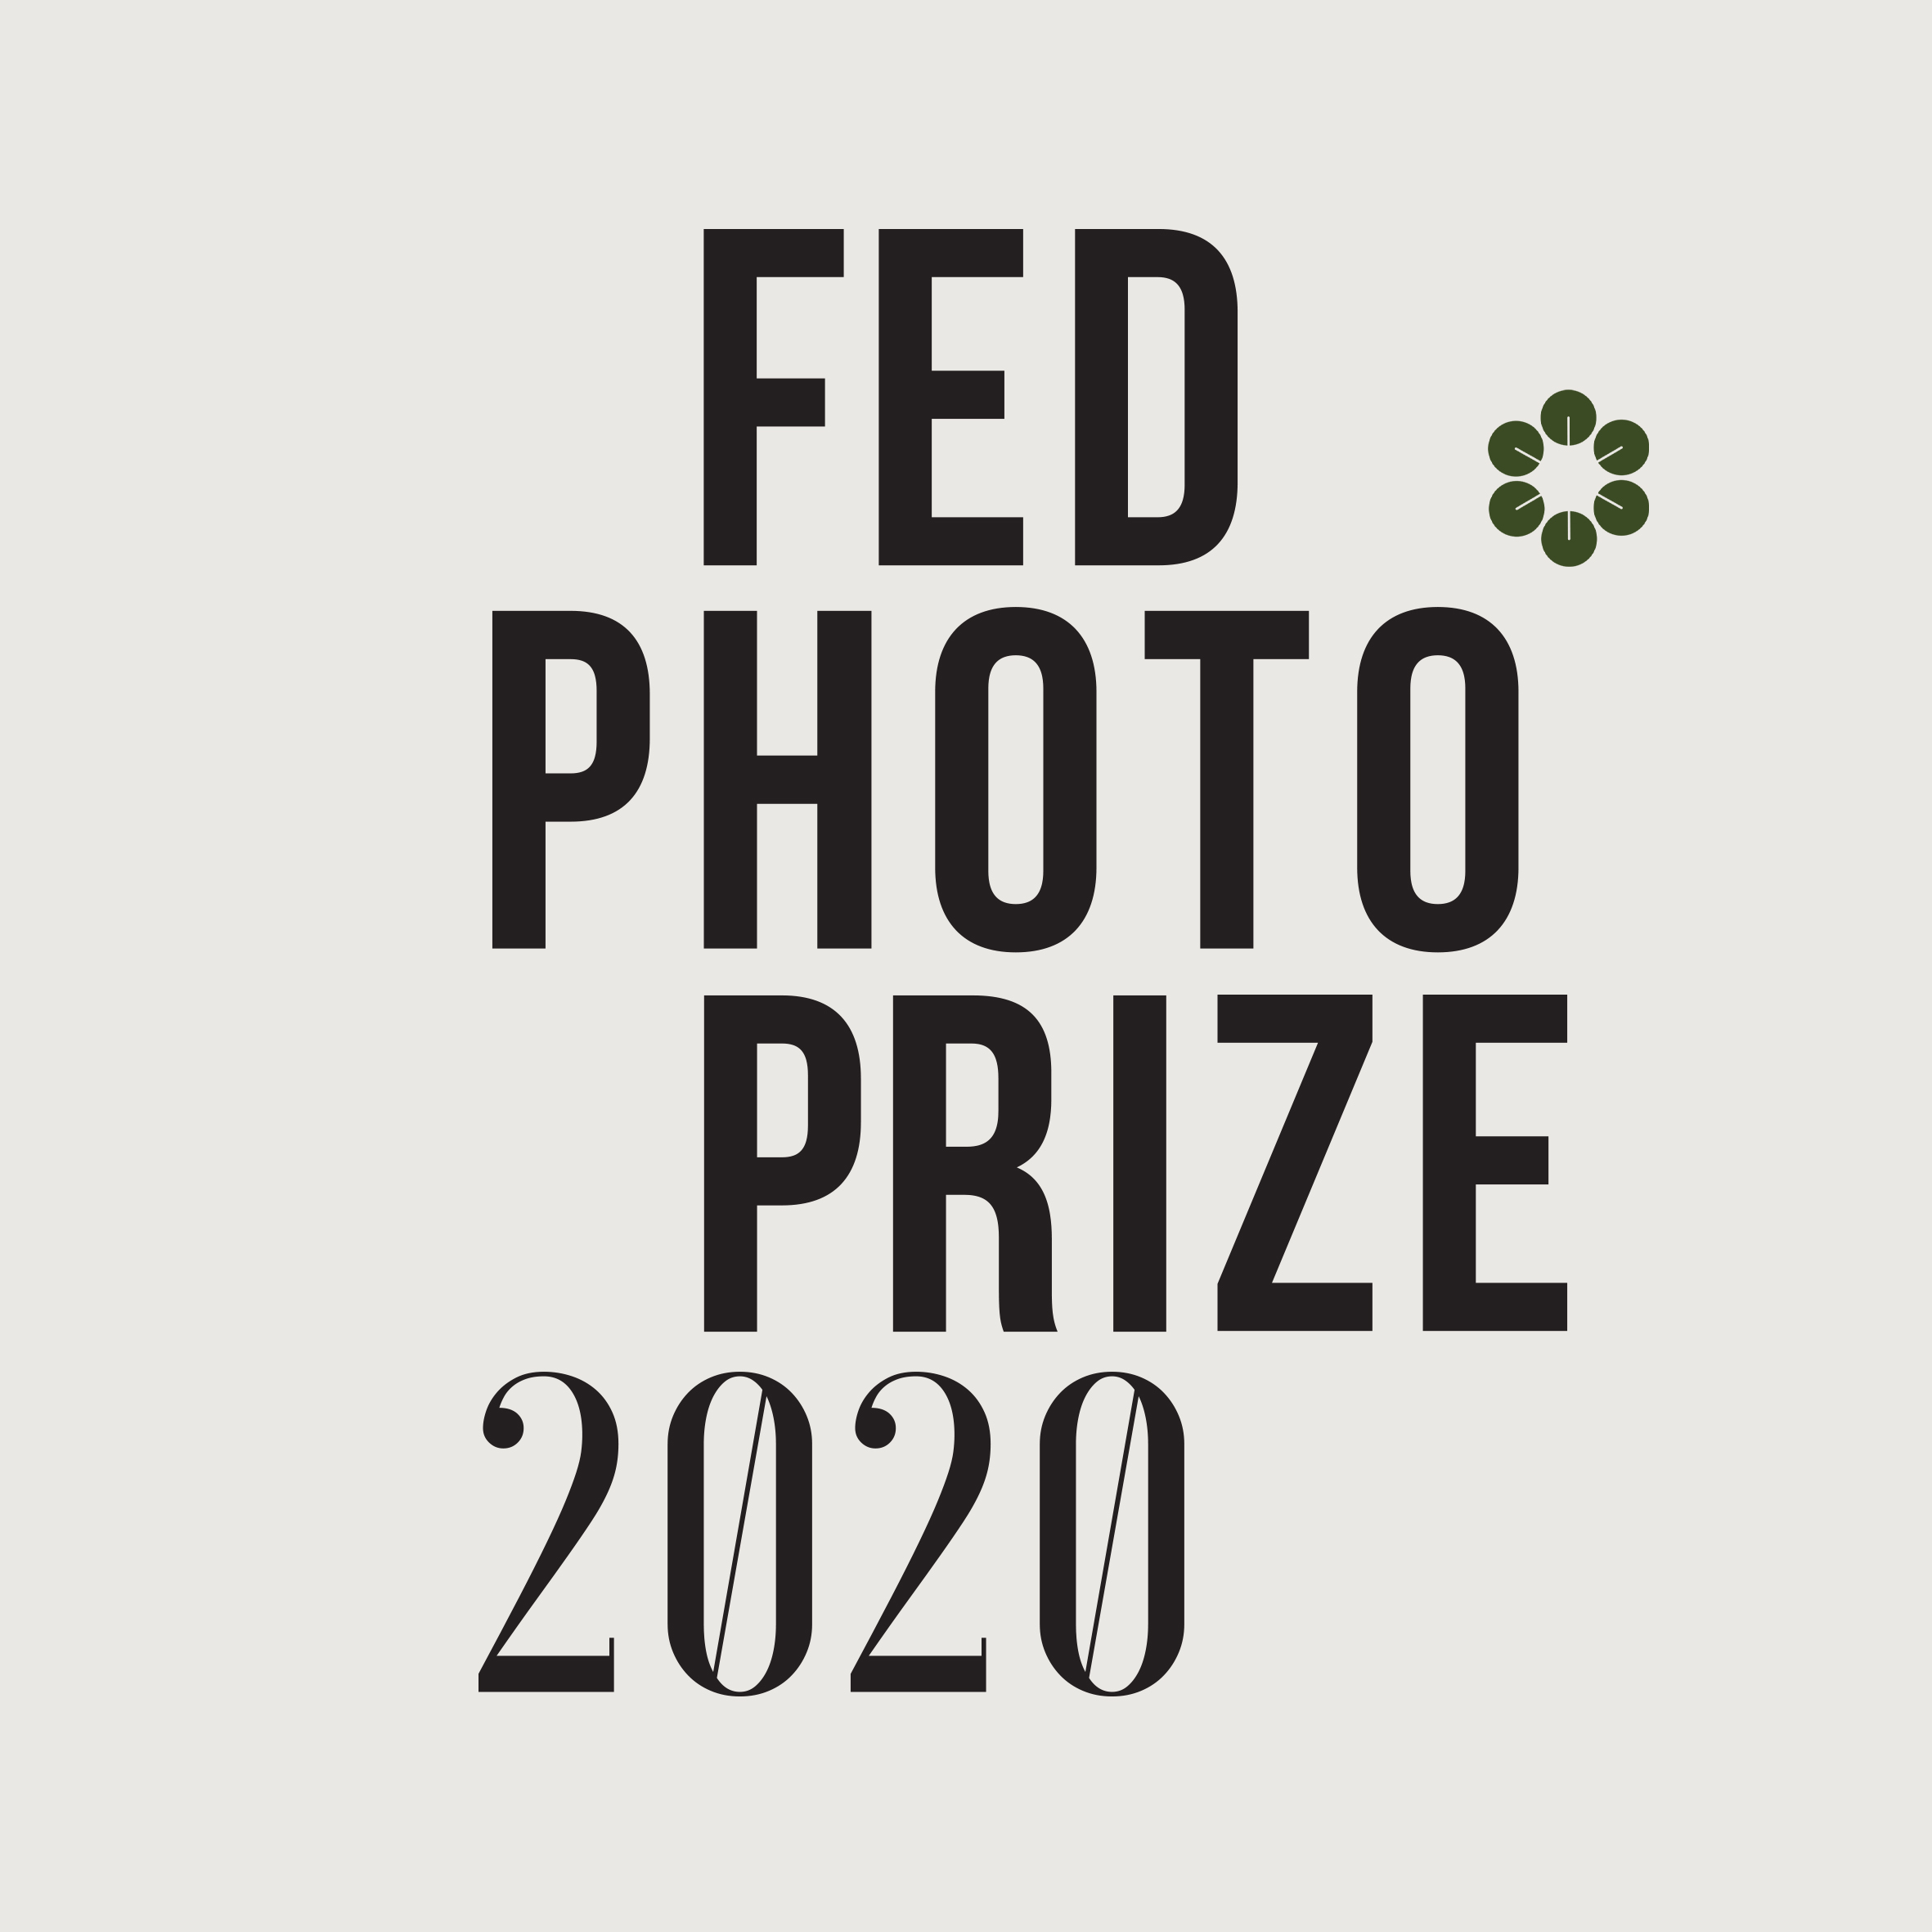 Federation Photography Prize 2020